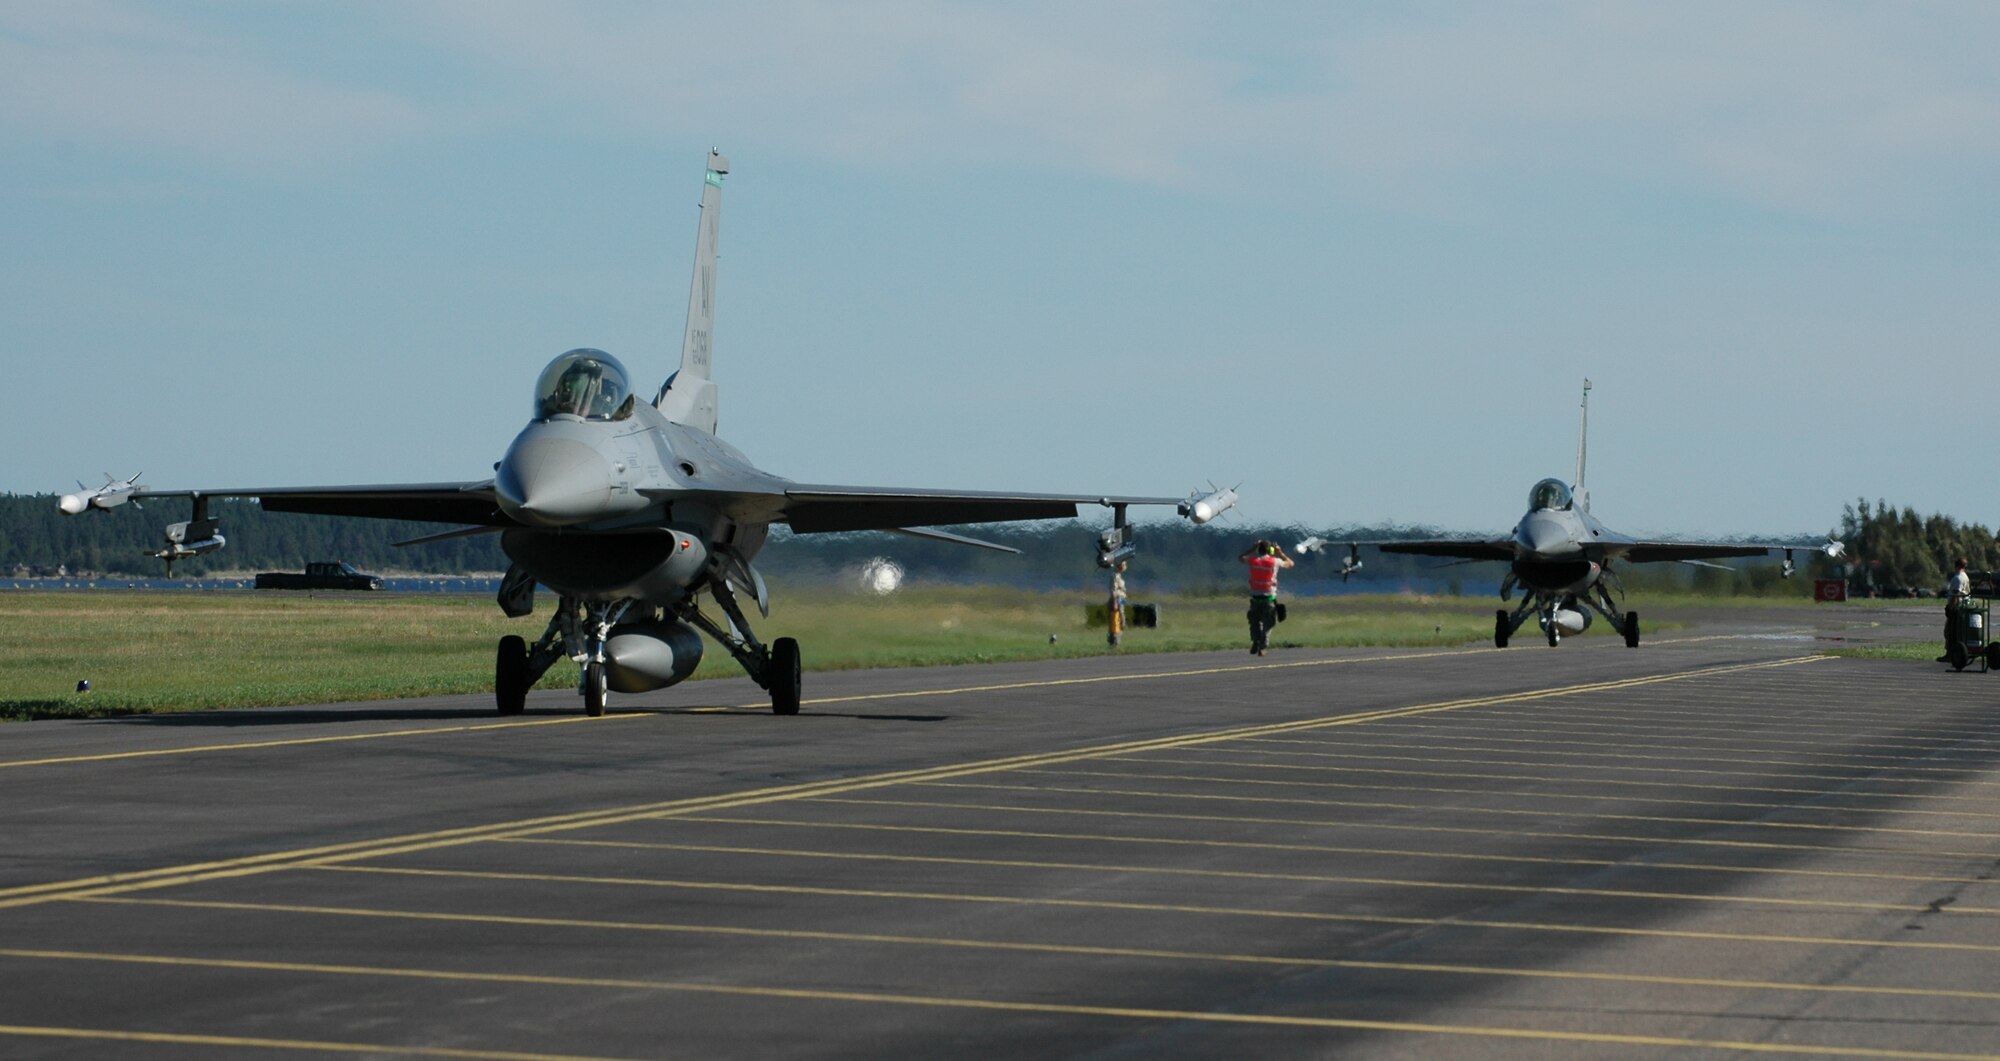 Two Aviano F-16s taxi down the runway after conducting an air-to-ground flying mission Aug. 5, 2010 at Kallax Air Base, Sweden. More than 250 Airmen from the 555th Fighter Squadron and 31st Aircraft Maintenance Squadron traveled to the Swedish air base on July 30, 2010 for a two week exercise conducting air-to-air and air-to-ground flying missions alongside the Swedish air force members assigned to Norrbotten Wing. (U.S. Air Force photo by Tech. Sgt. Lindsey Maurice/Released) 